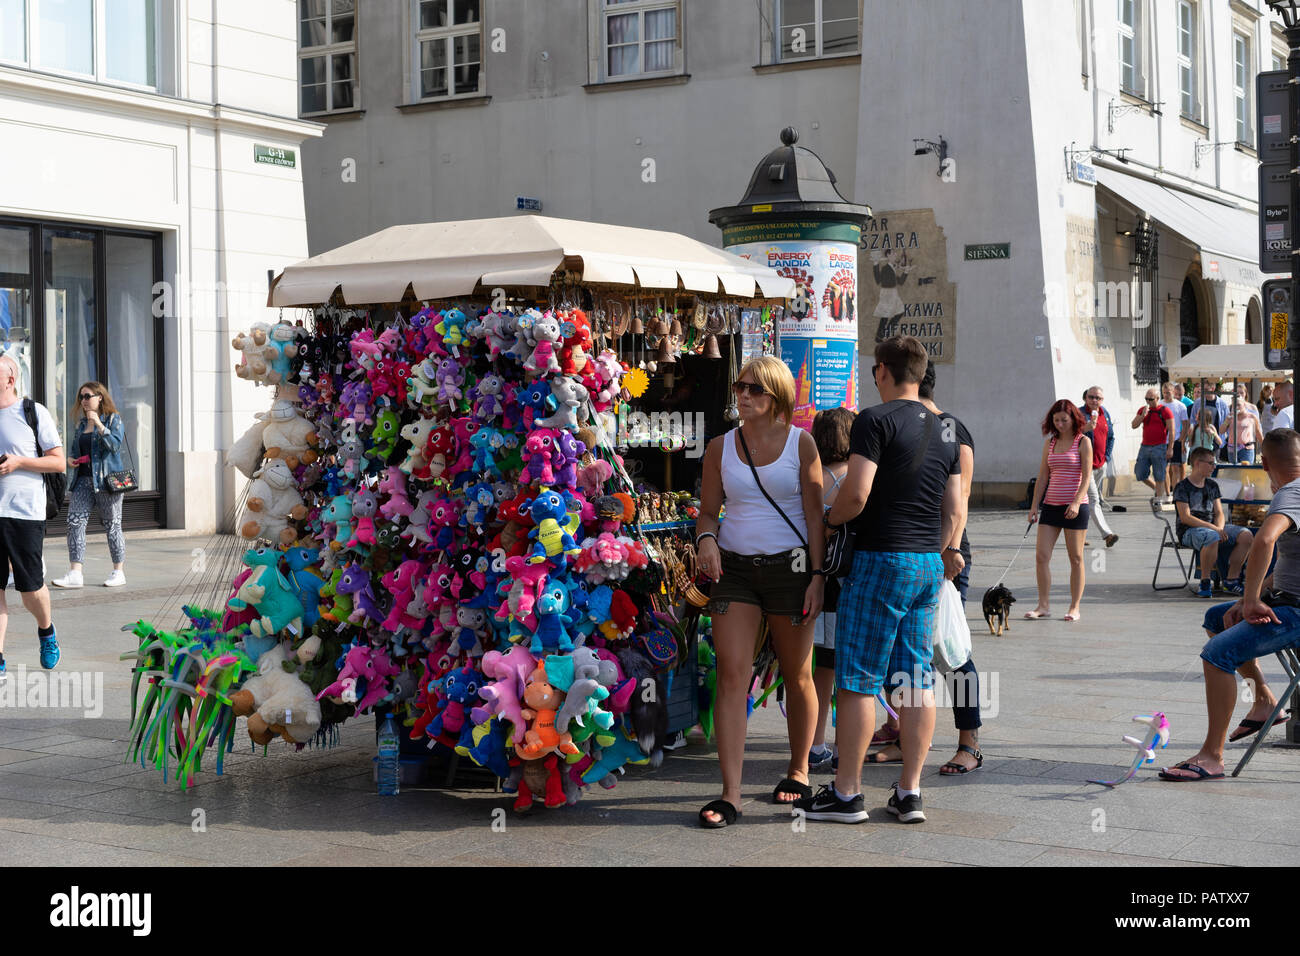 A trader stall selling soft toys and trinkets,Main Square, Krakow, Poland,Europe  Stock Photo - Alamy